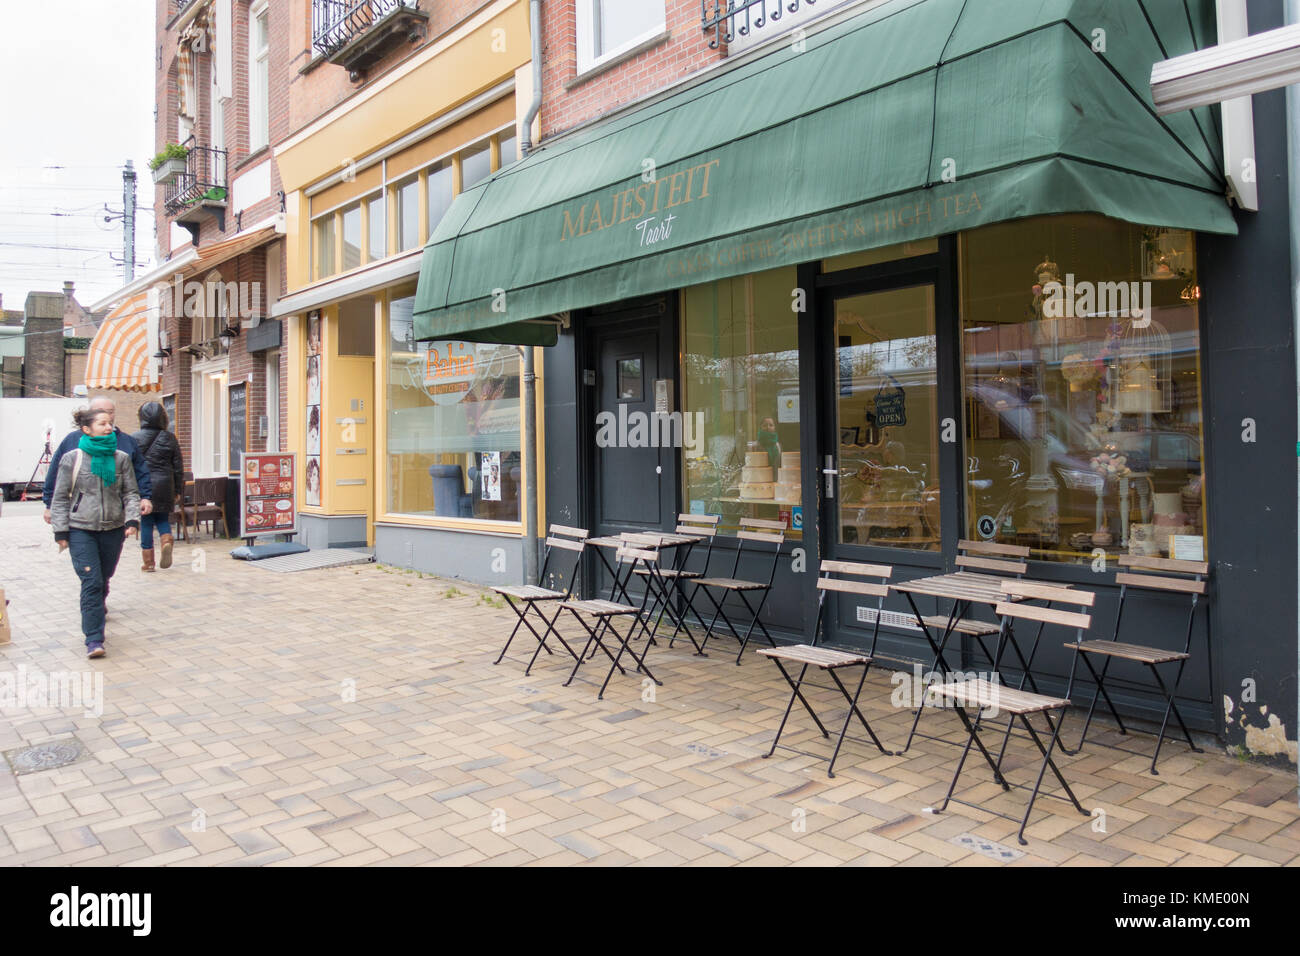 Exterior of Majesteit Taart, a bakery in the Javastraat in Amsterdam, The Netherlands Stock Photo